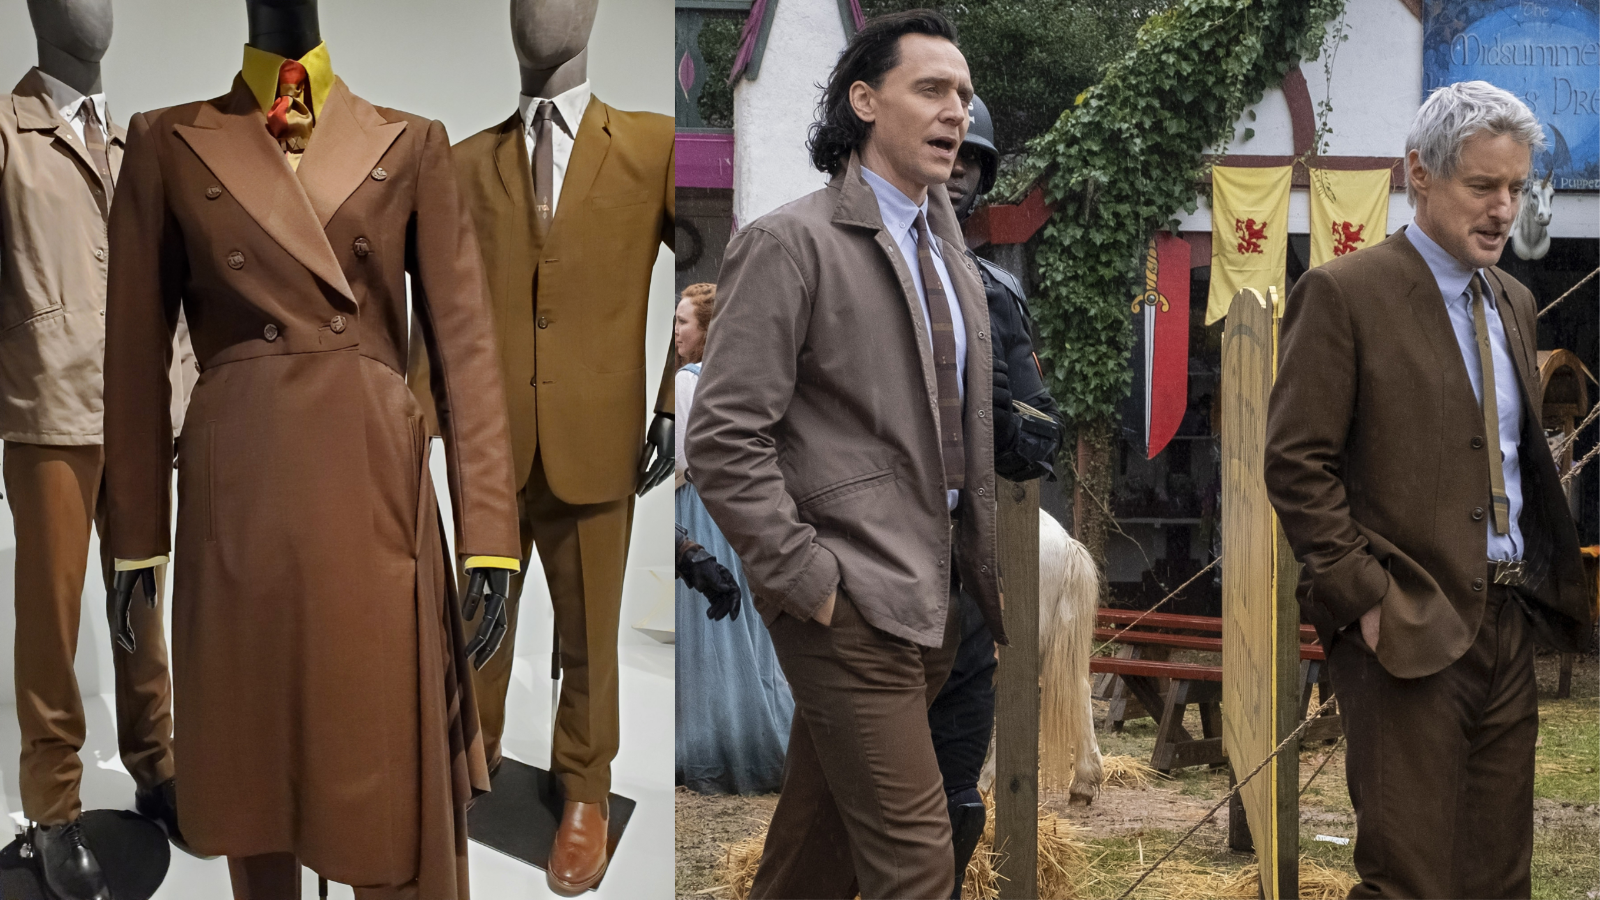 Loki, Ravonna, and Mobius's TVA outfits on three mannequins on the left, Loki and Mobius wearing those outfits in the show on the right.